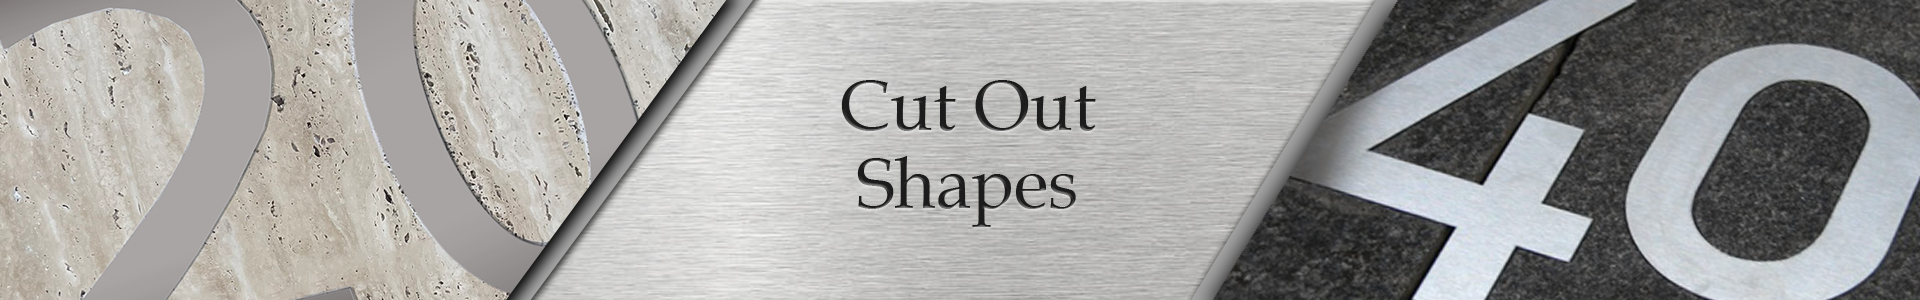 cut-out-shapes.png